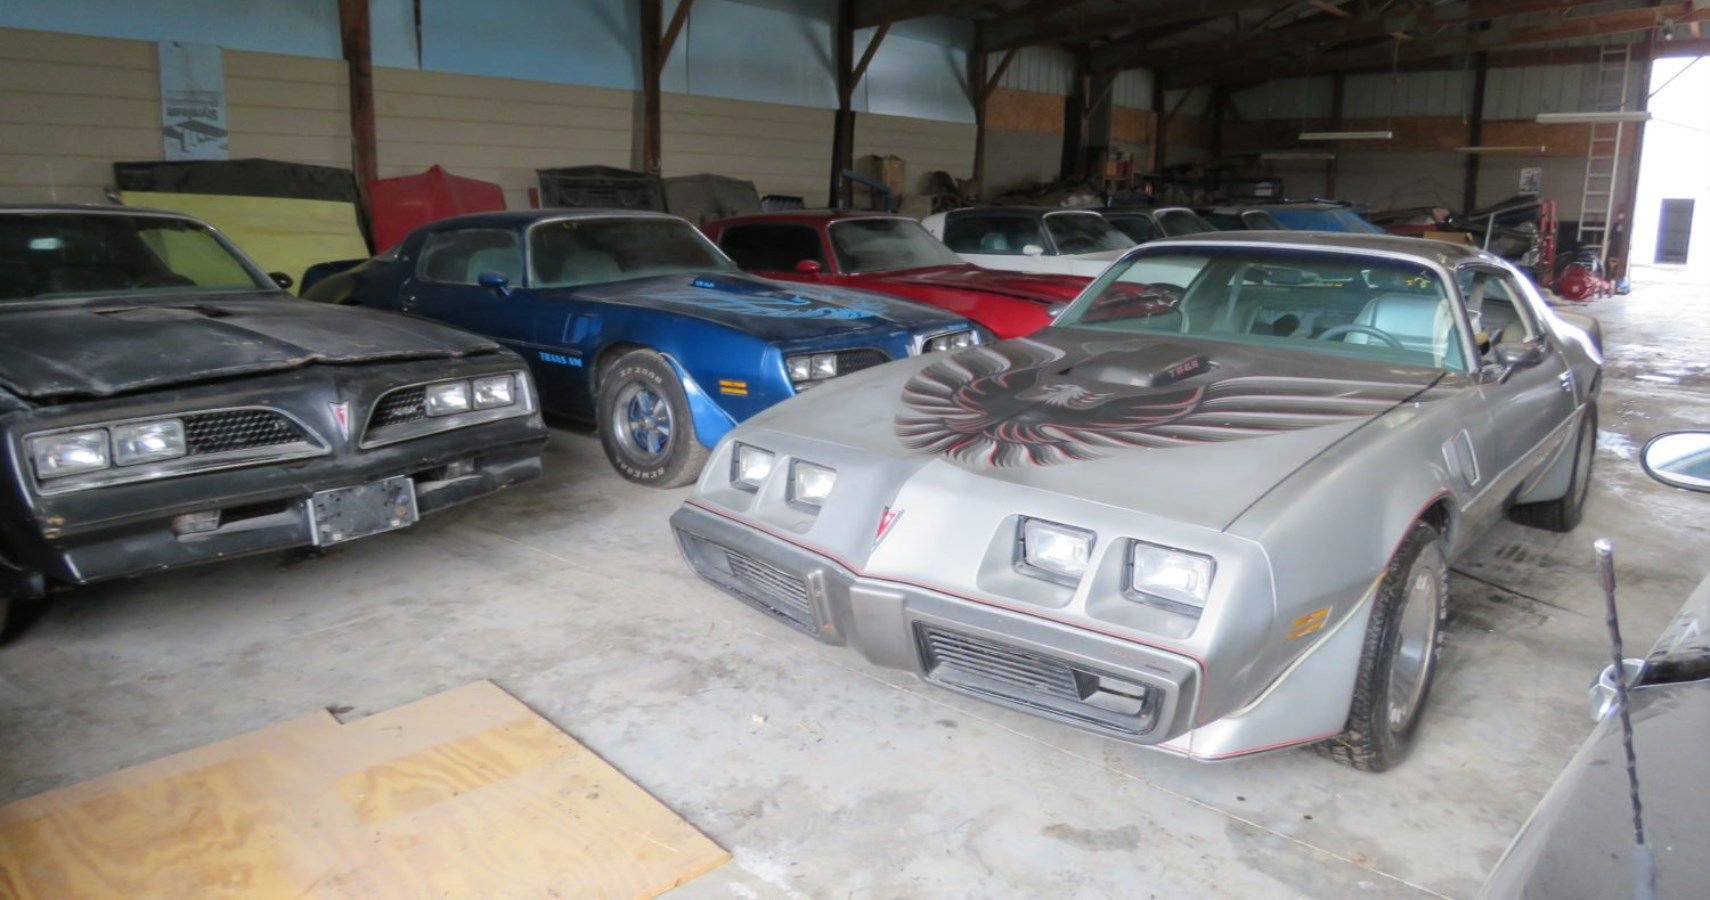 Pontiac Barn Find Jackpot Discovered Belonging To Trans Am And Firebird Collector